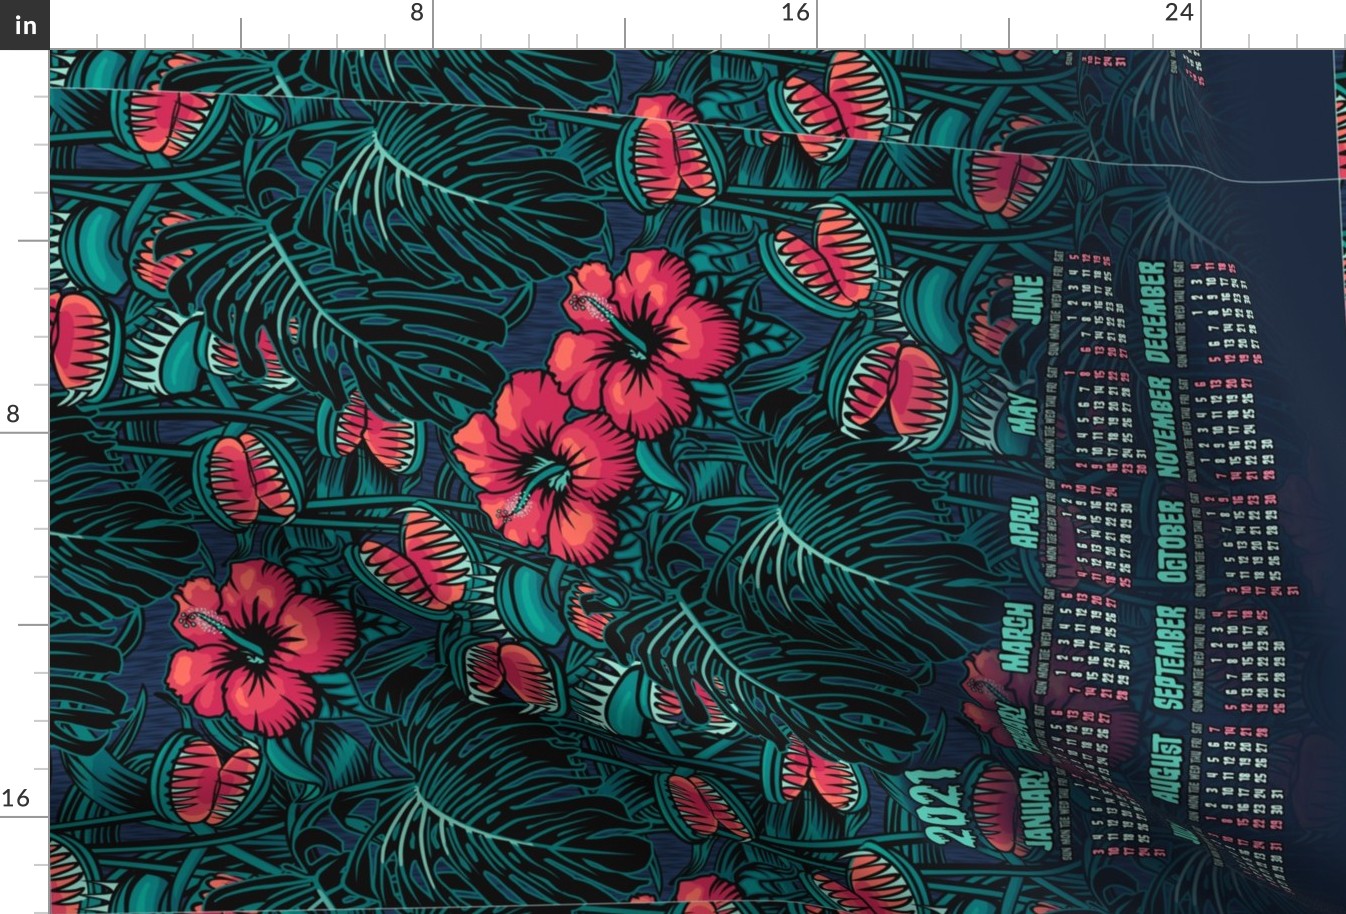 ★ 2021 : THE LAW OF THE JUNGLE ★ Tropical Tea Towel Calendar - Venus Fly Trap, Hibiscus and Monstera - Pink + Teal // Collection : It’s a Jungle Out There – Savage Hawaiian Prints *** Please read the "Comments" section before ordering fabric ;-)